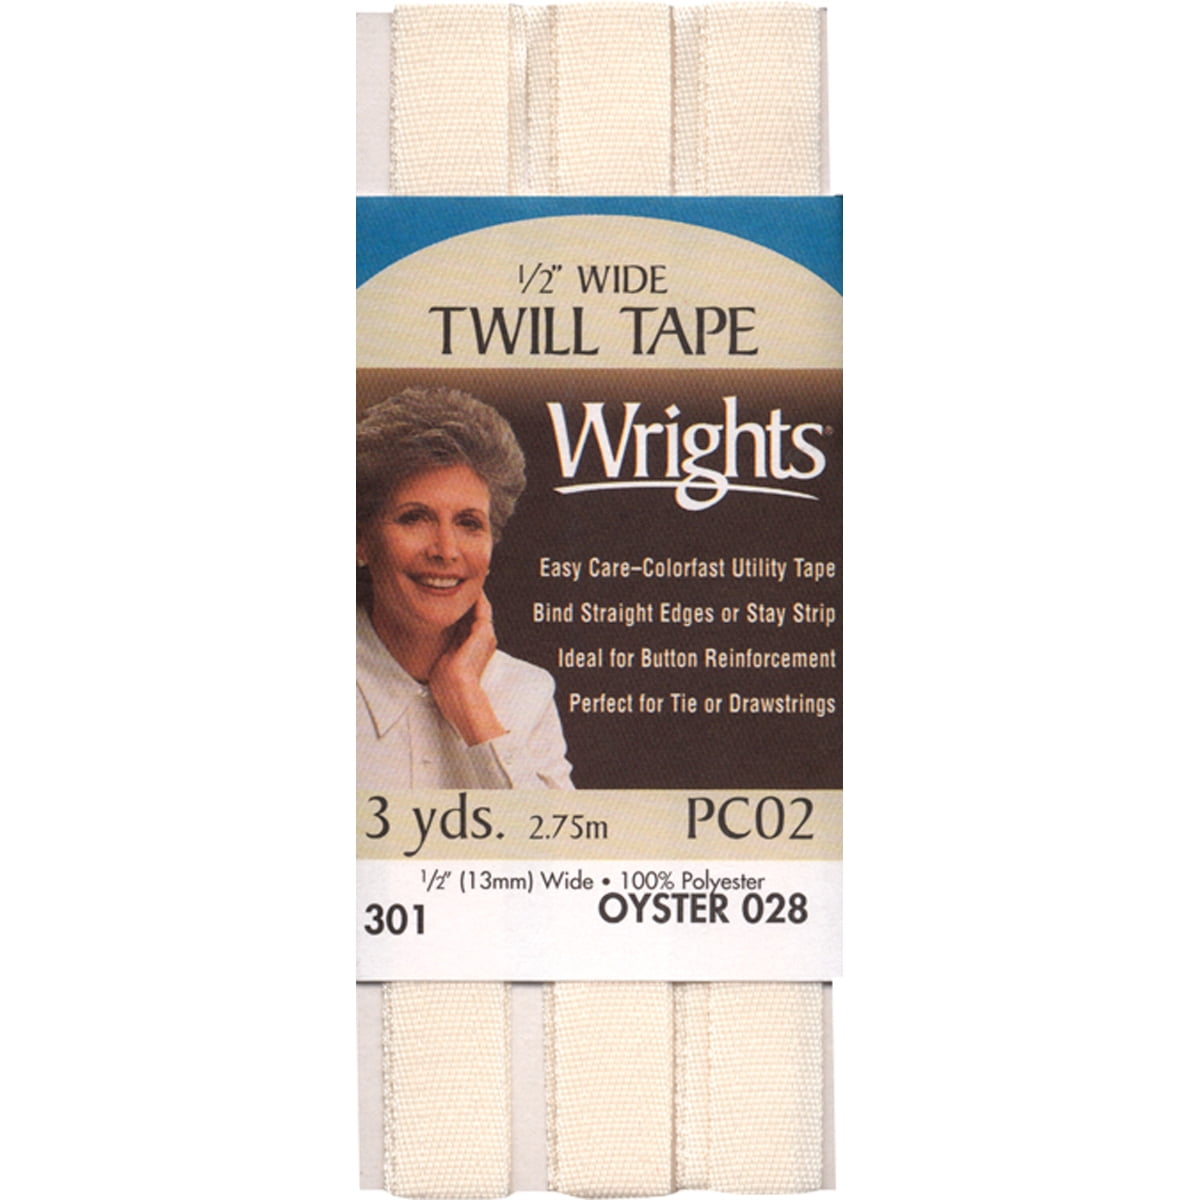 1 Polyester Twill Tape from Wrights 2 yards